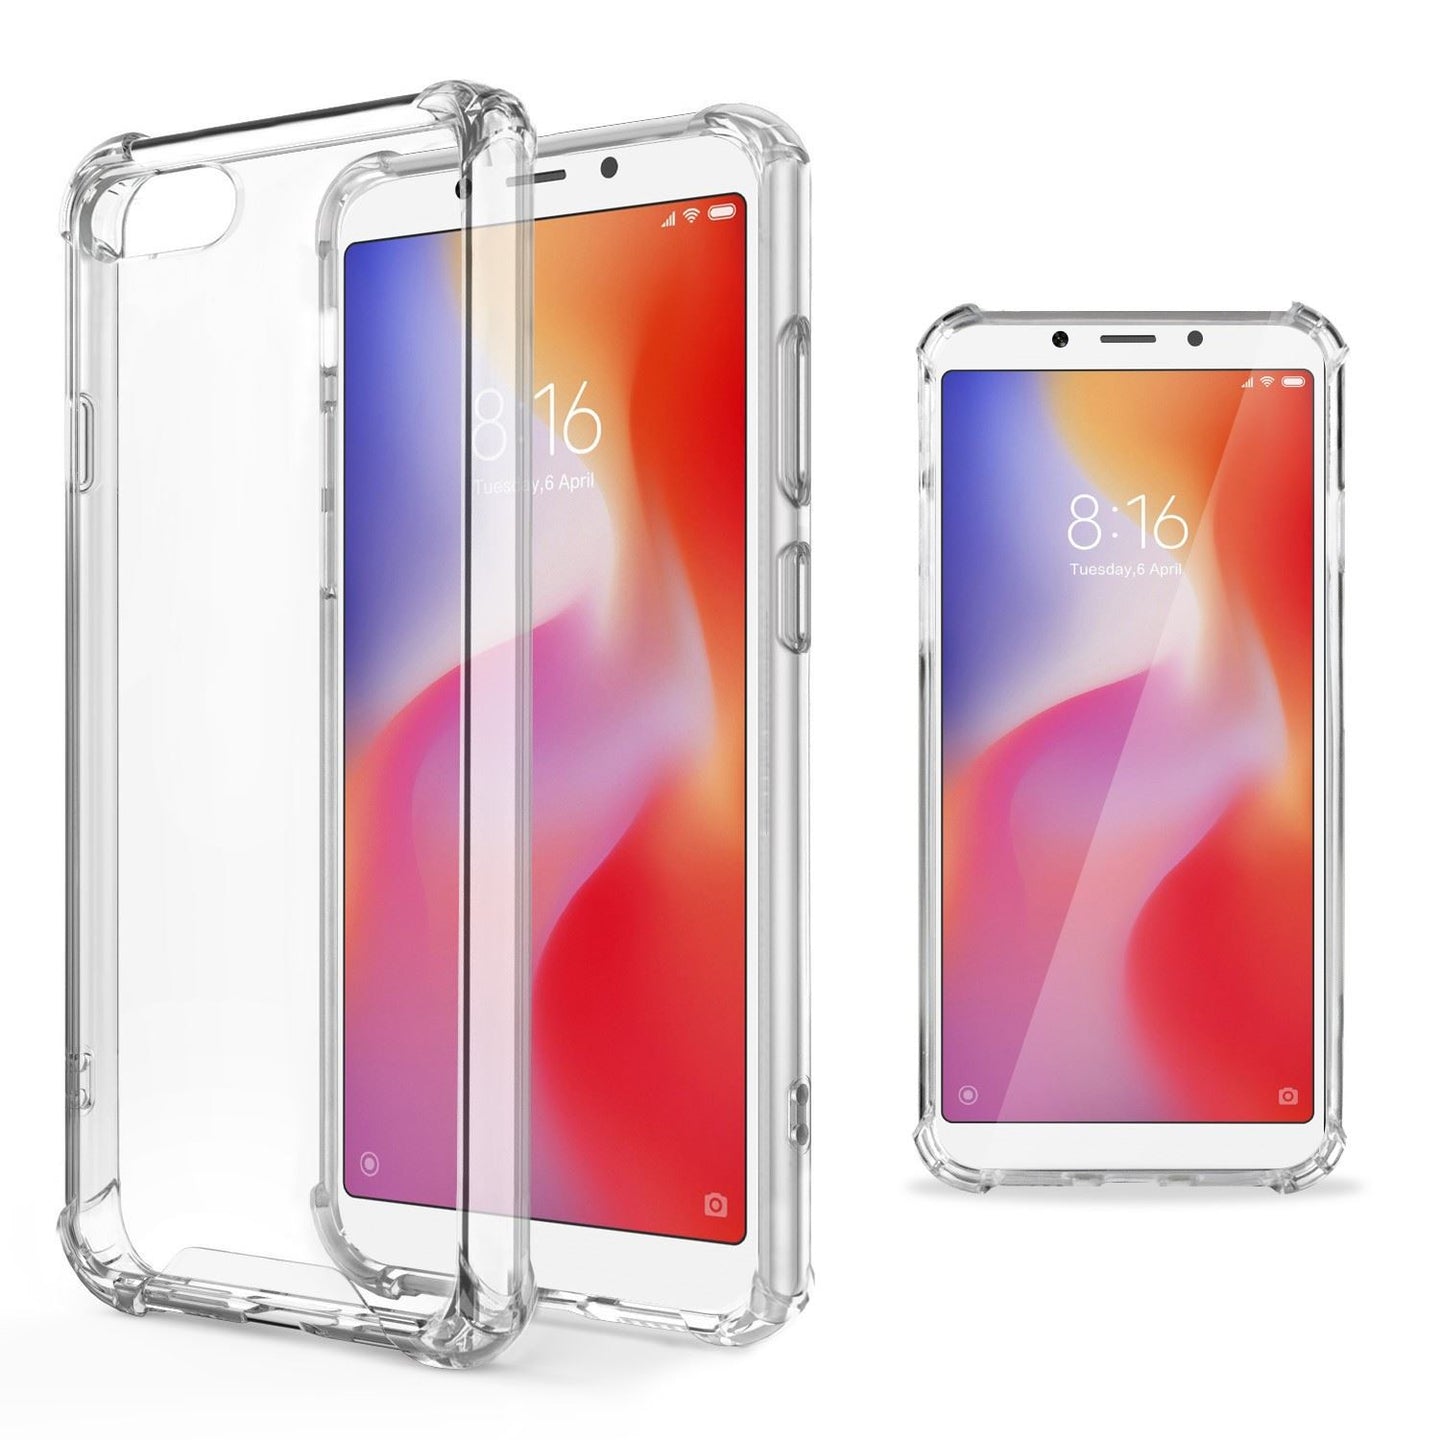 Moozy Shock Proof Silicone Case for Xiaomi Redmi 6A - Transparent Crystal Clear Phone Case Soft TPU Cover